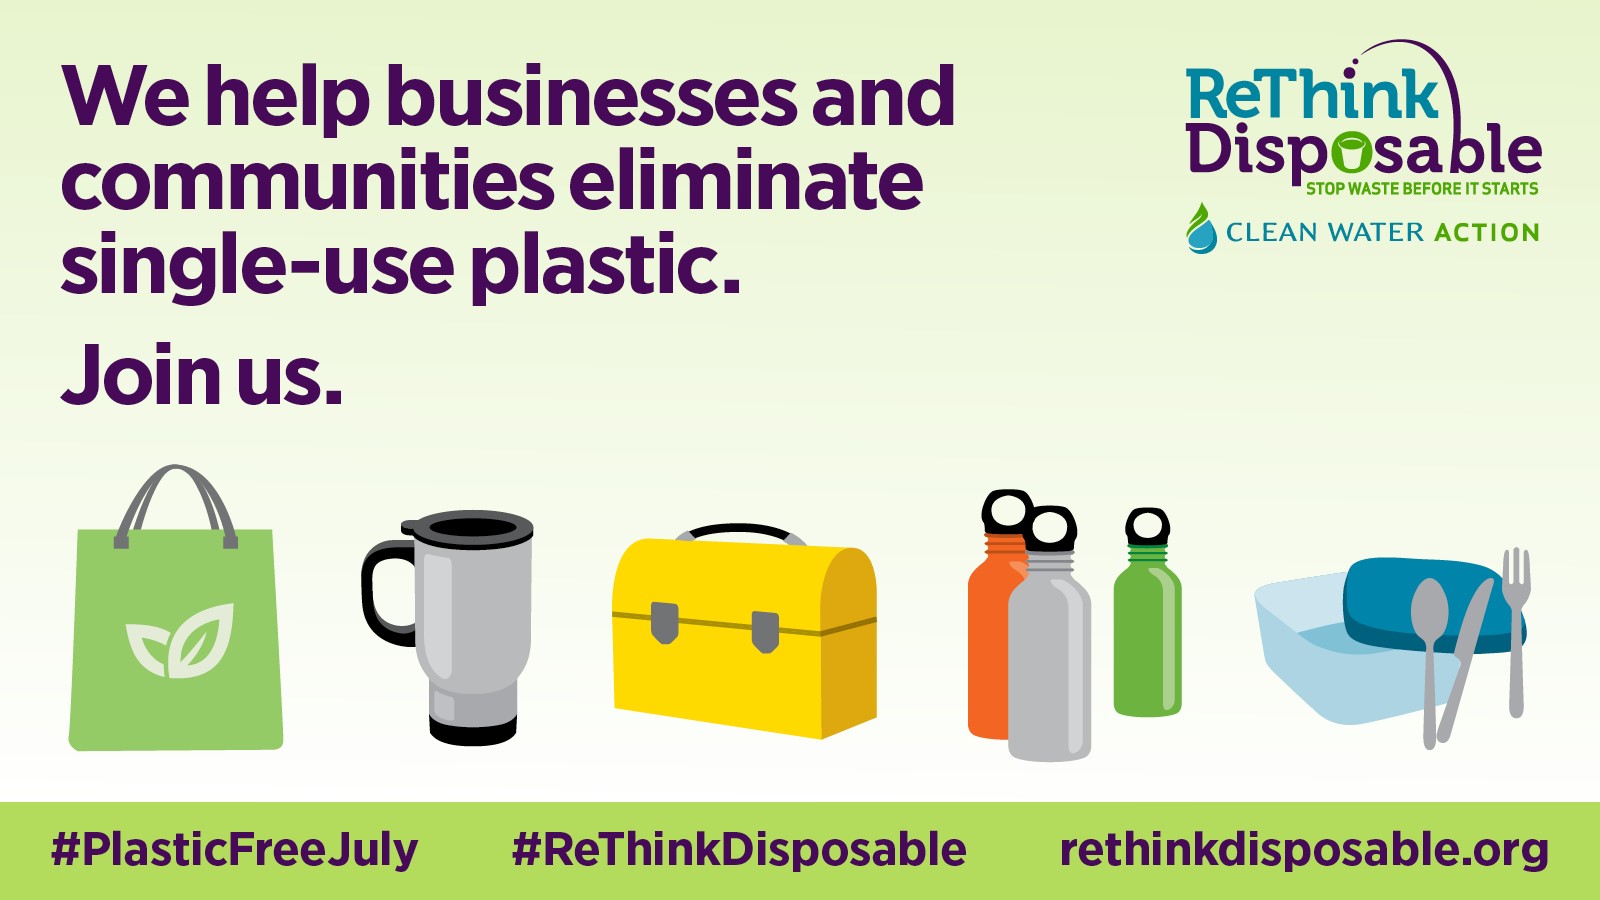 ReThink Disposable_Plastic Free July 2019_Program_Twitter. Designed by Clean Water Action